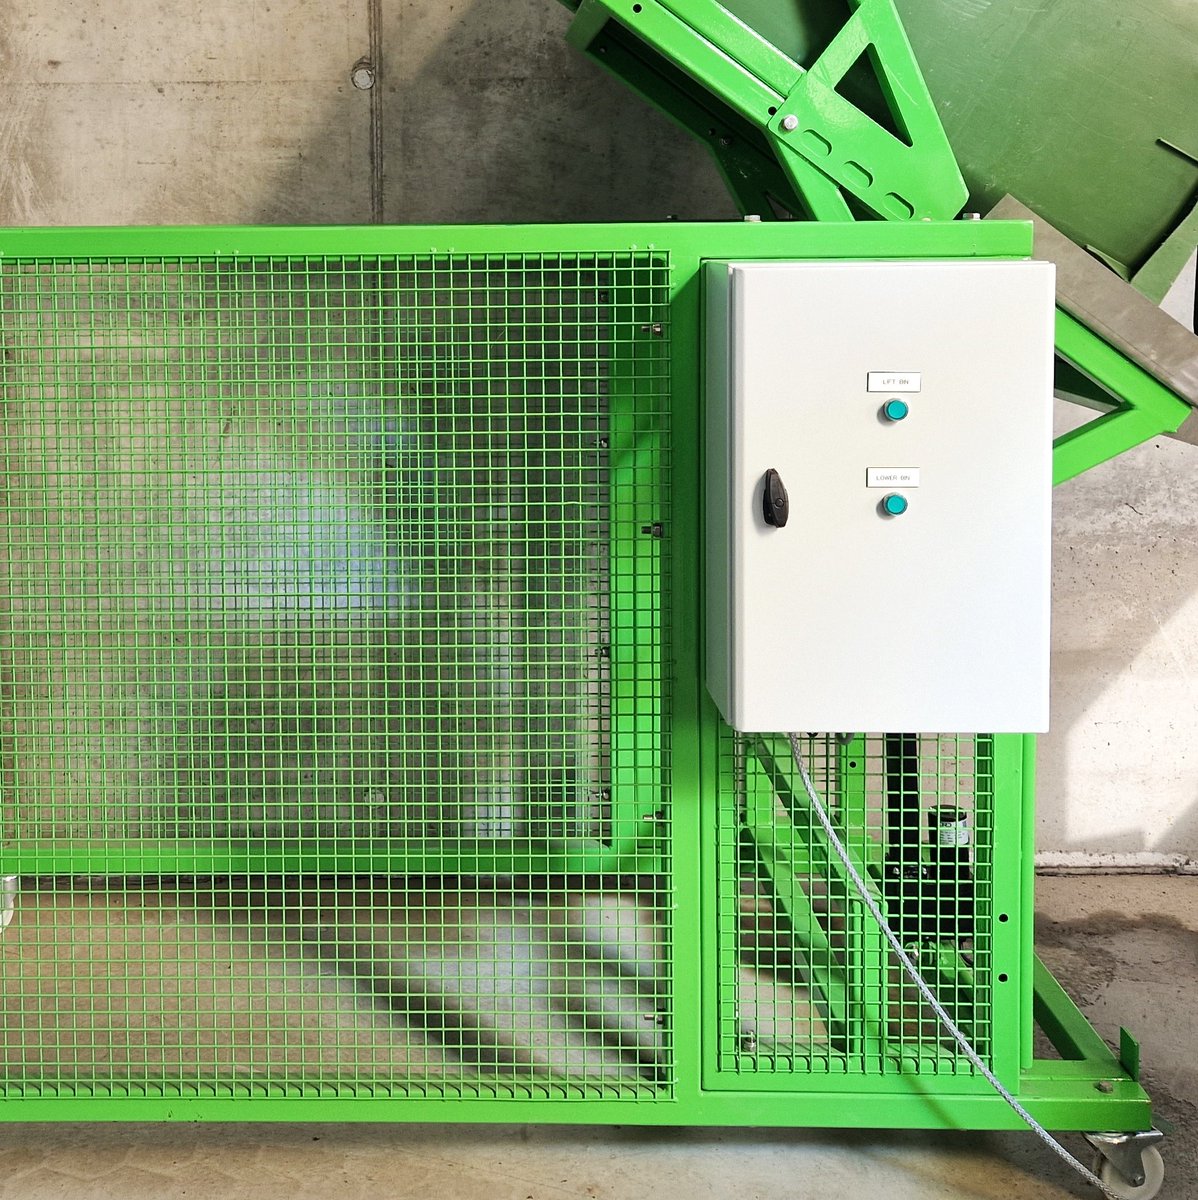 Did you know @HarpElectrical supplies automated control panels for Harp Biodigester & accessories? Teaming up with @Harp_Renewables, we deliver a complete automated solution, meticulously crafted to meet your needs. 👉buff.ly/3WqZI6O
#automationsolutions #harpelectrical